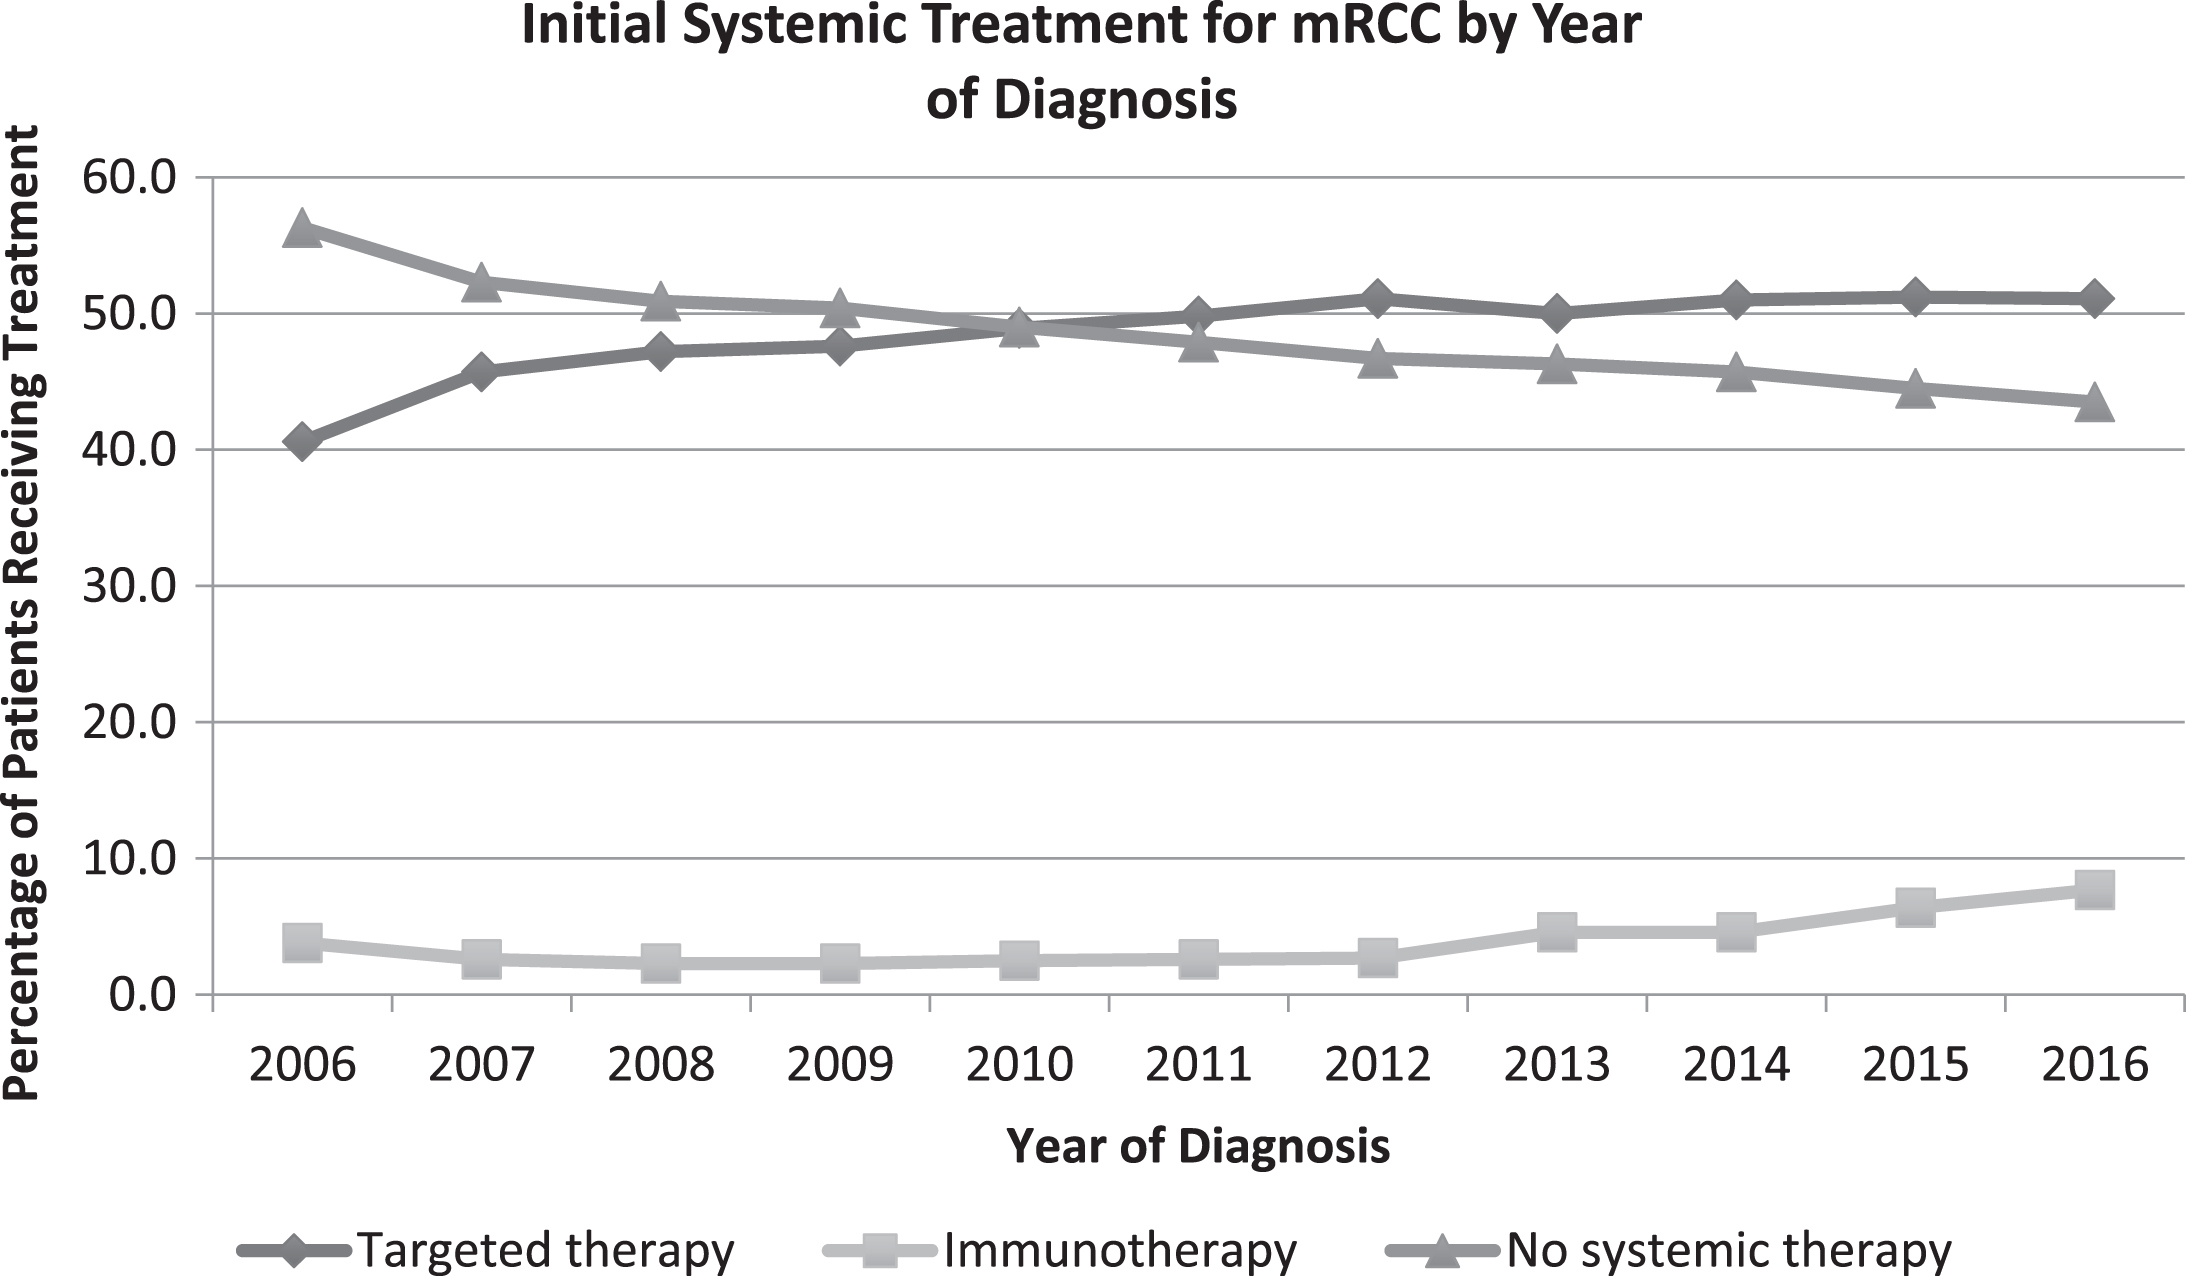 Trends in initial systemic treatment for mRCC by year of diagnosis.